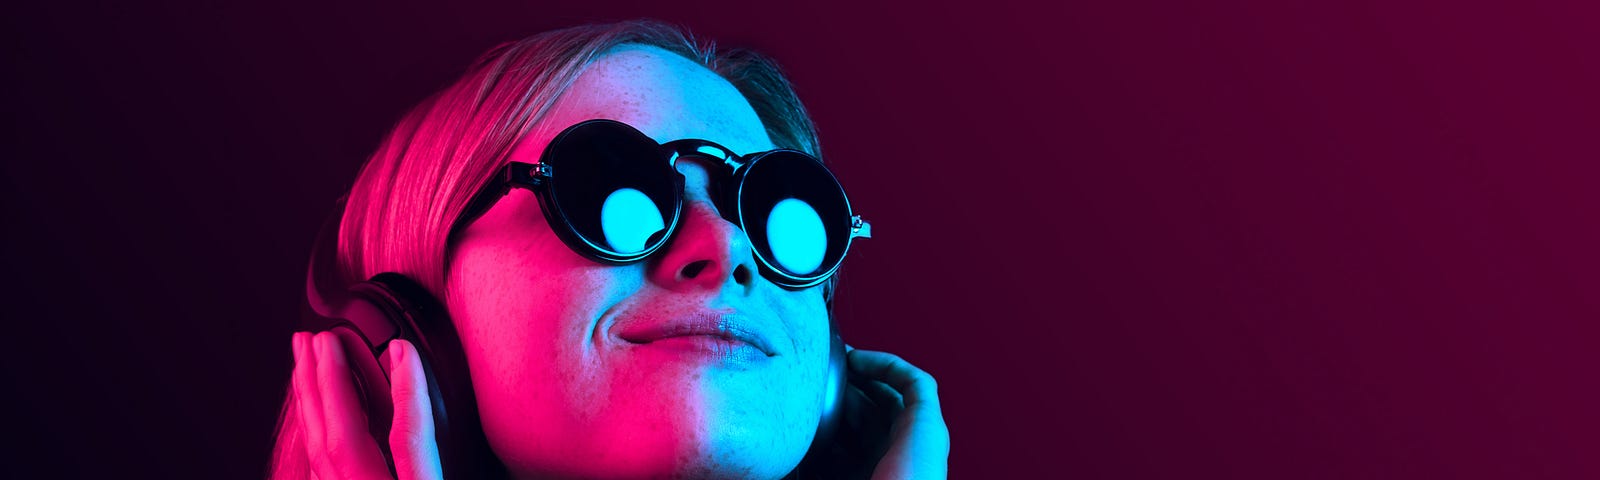 A photo of a girl with sunglasses and headphones on, with neon pink/blue lighting.